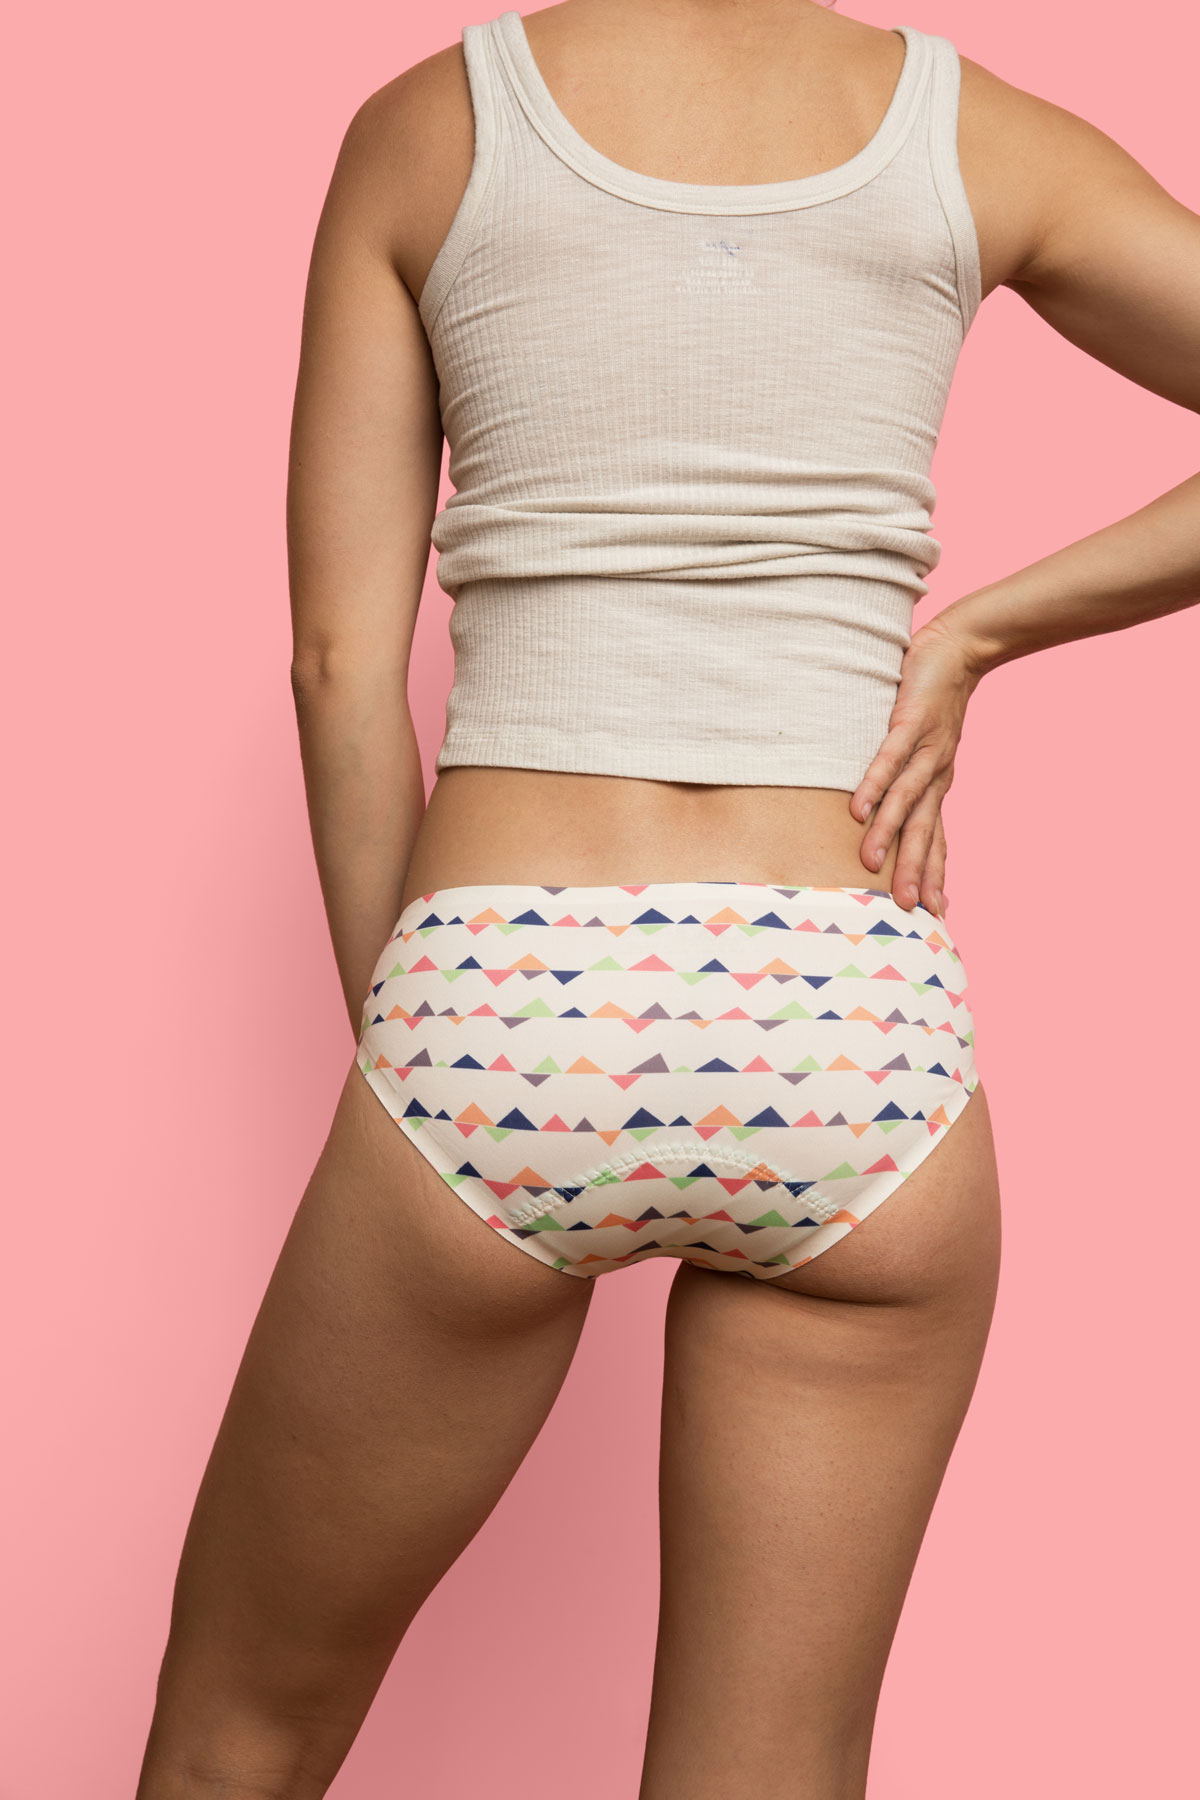 Teenager Underwear That Protects Throughout the Day